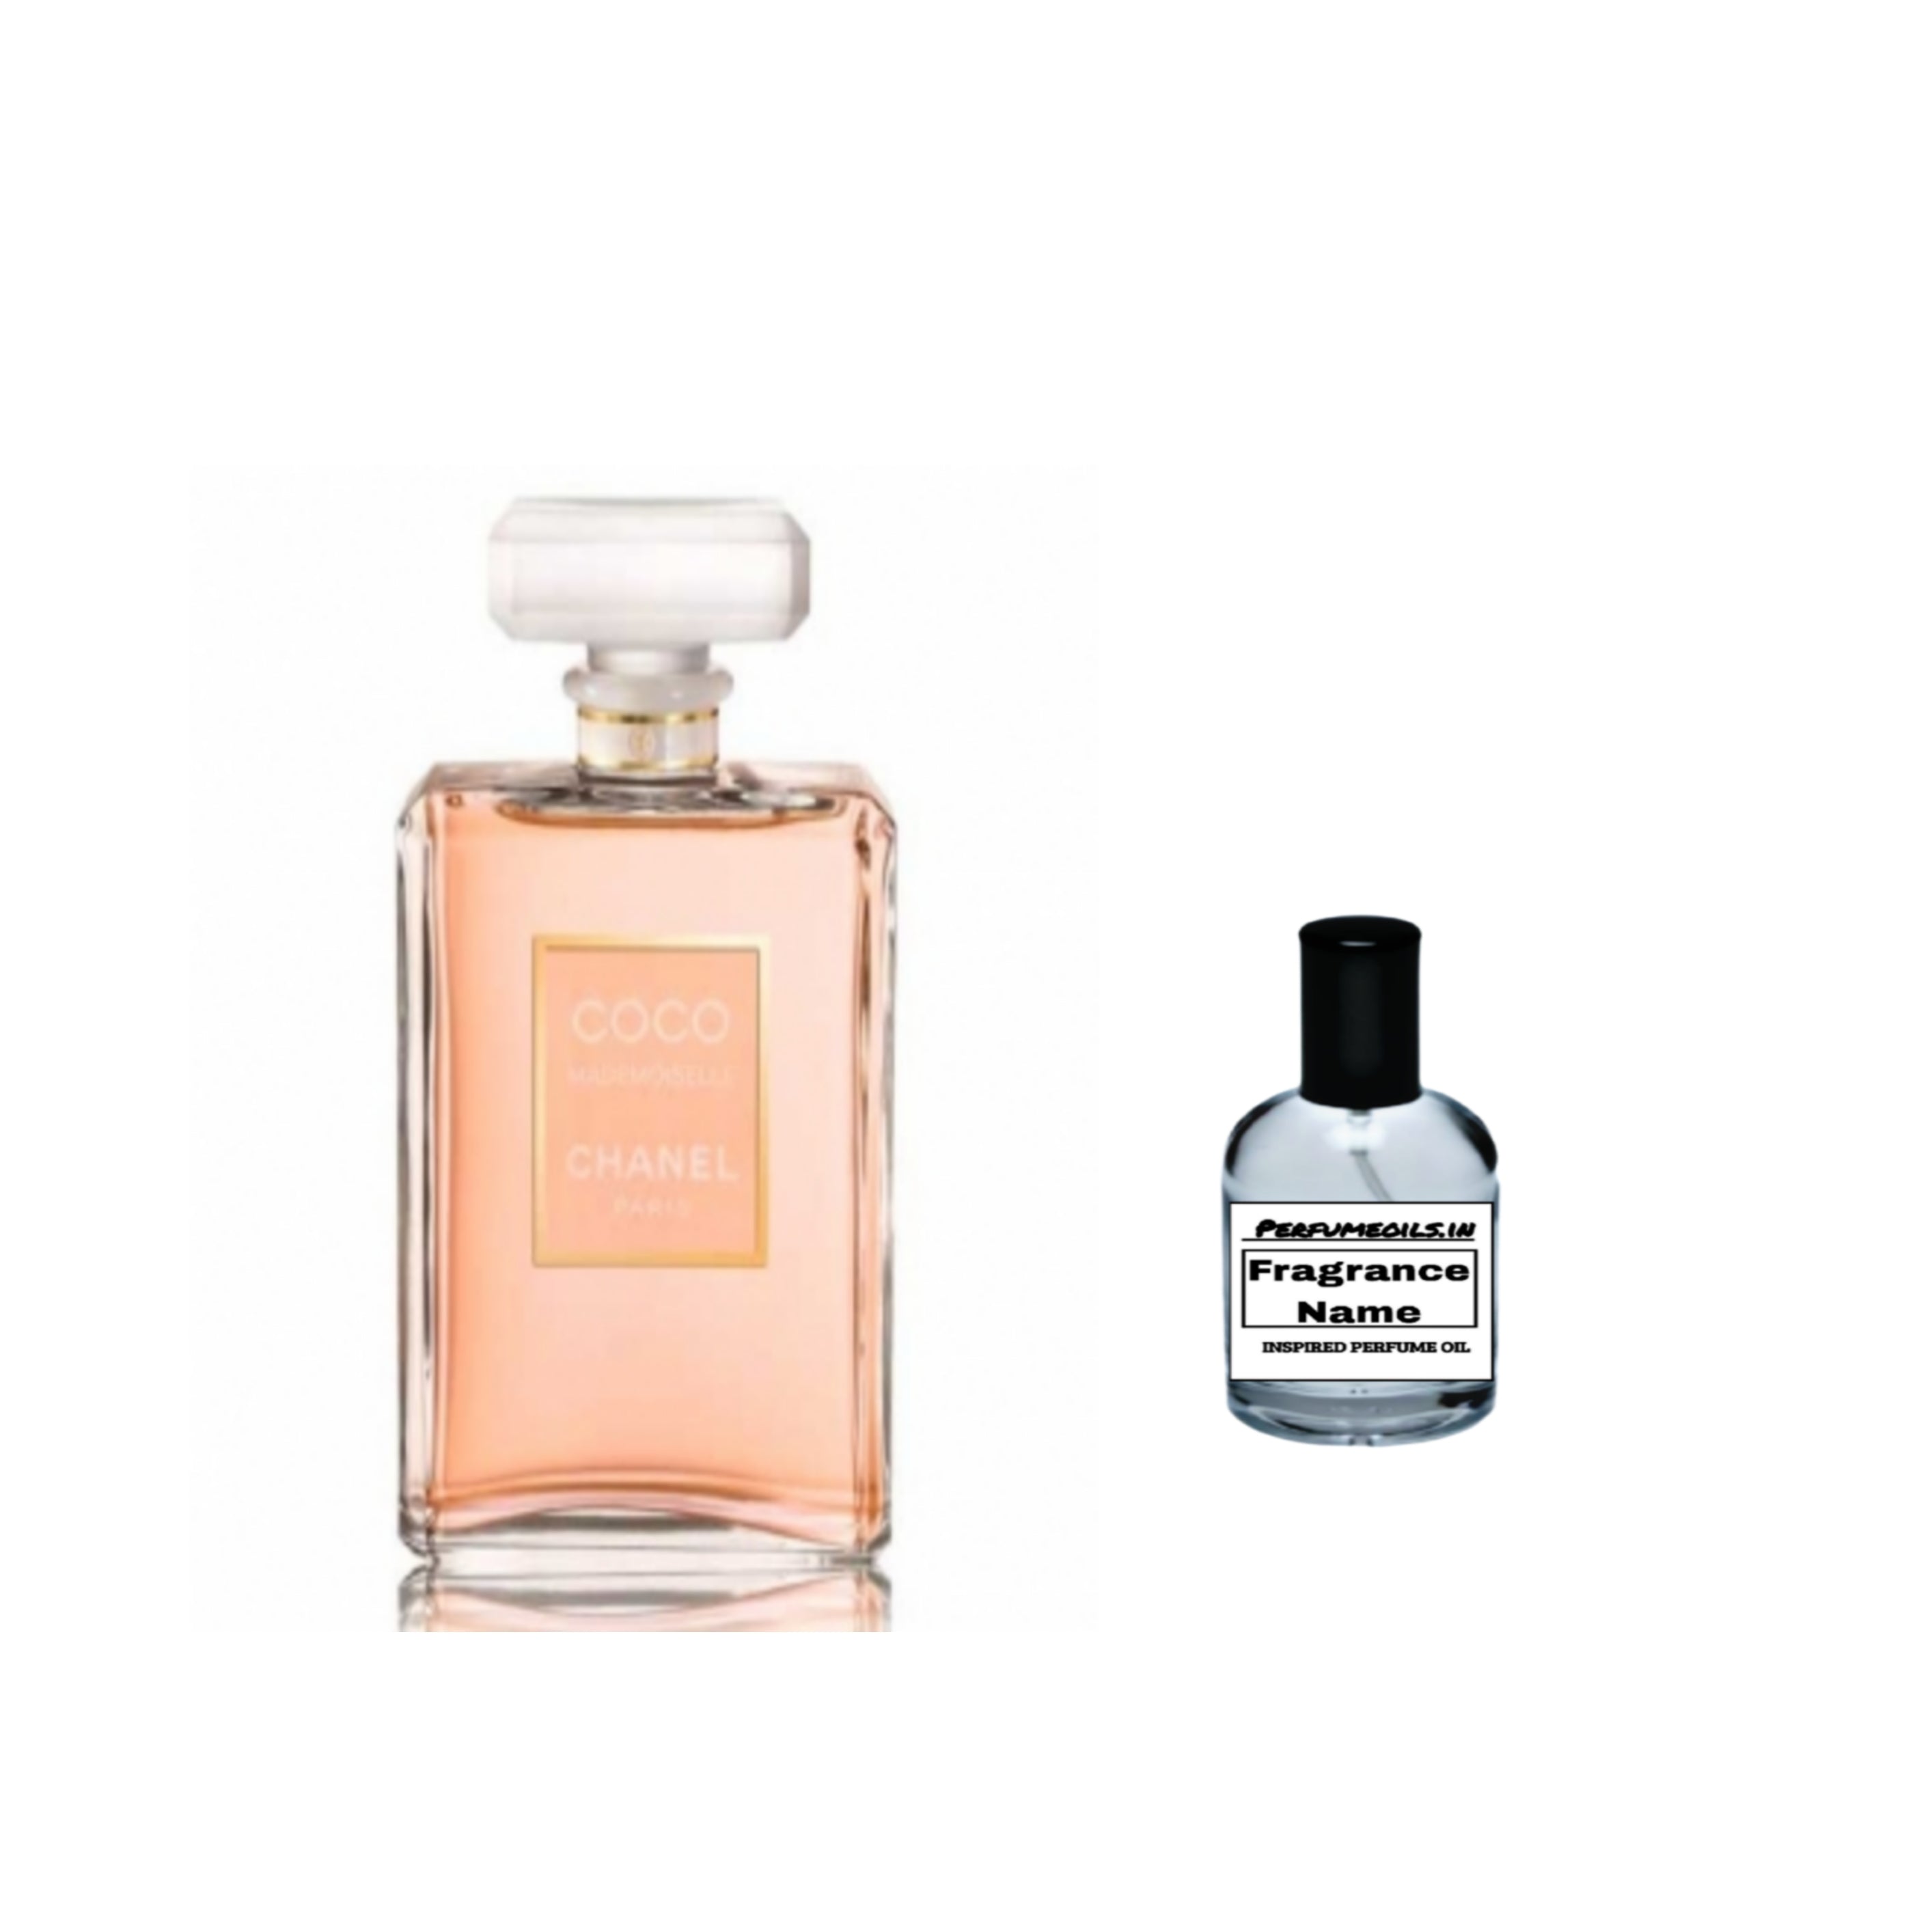 Coco Mademoiselle Chanel for women inspired Perfume Oil